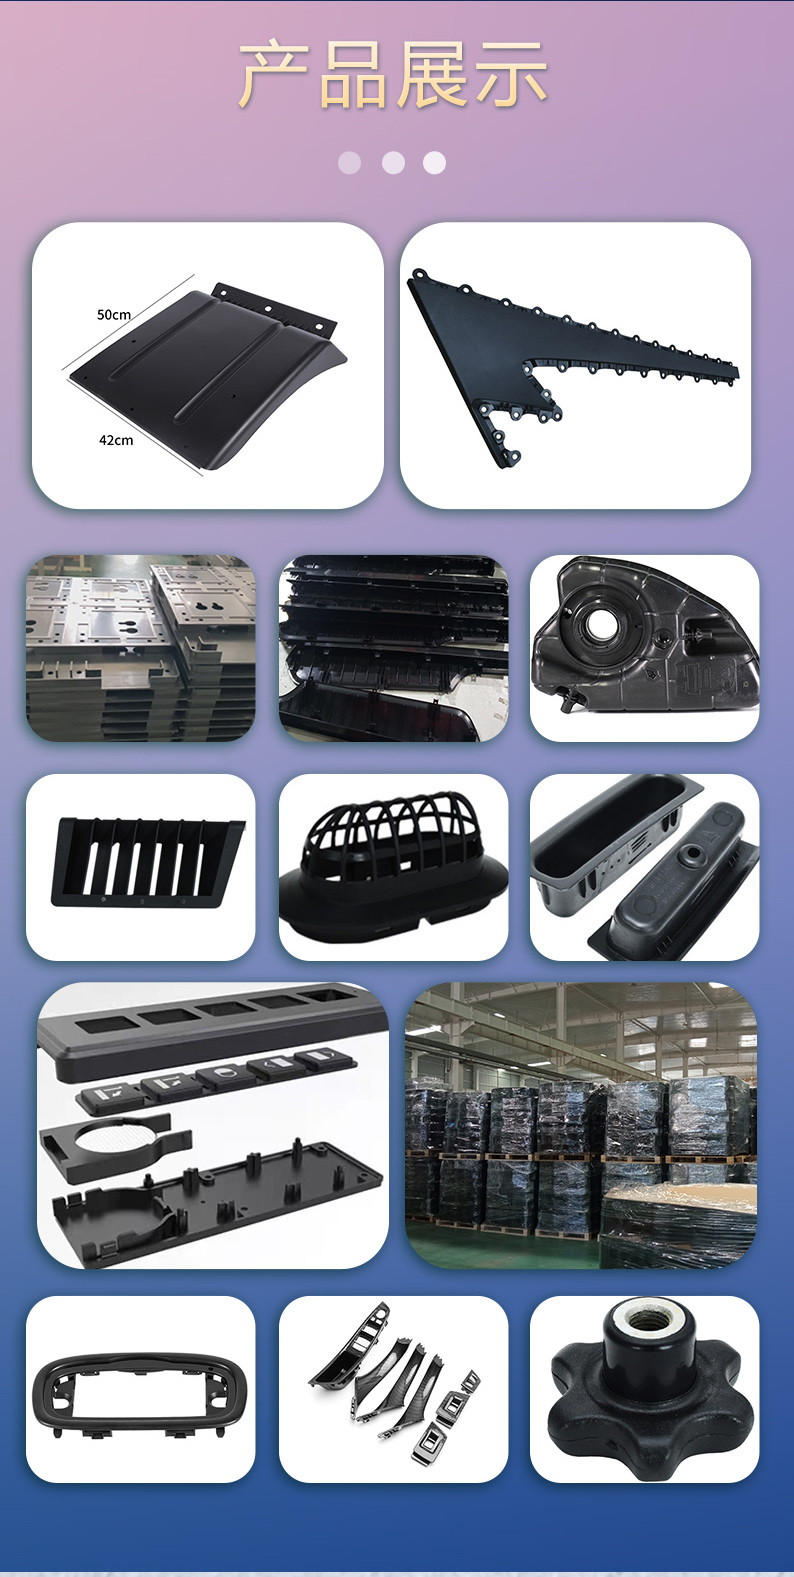 Injection molded automotive parts, interior molding processing, door and tailgate interior panels, automotive components, ABS foam skeleton